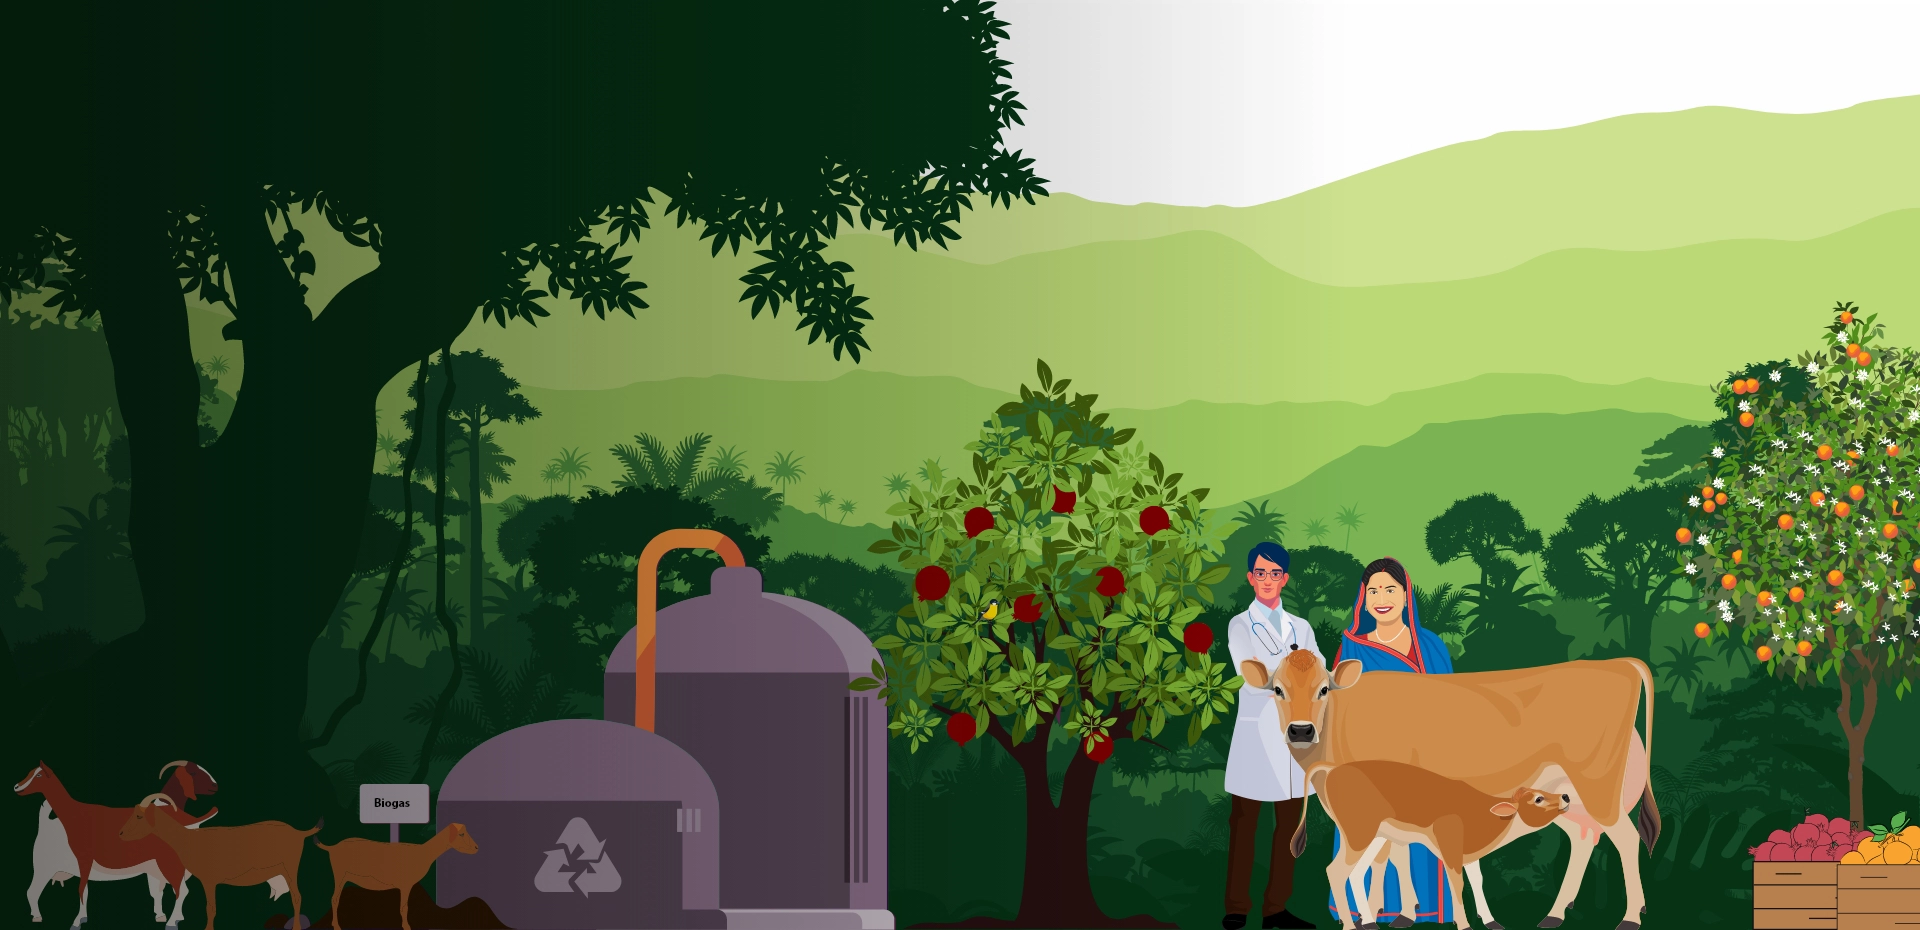 Image of Monyeboxx ecosystem, customers, veterinary doctor, cattles, fruit bearing trees and Biogas digestor